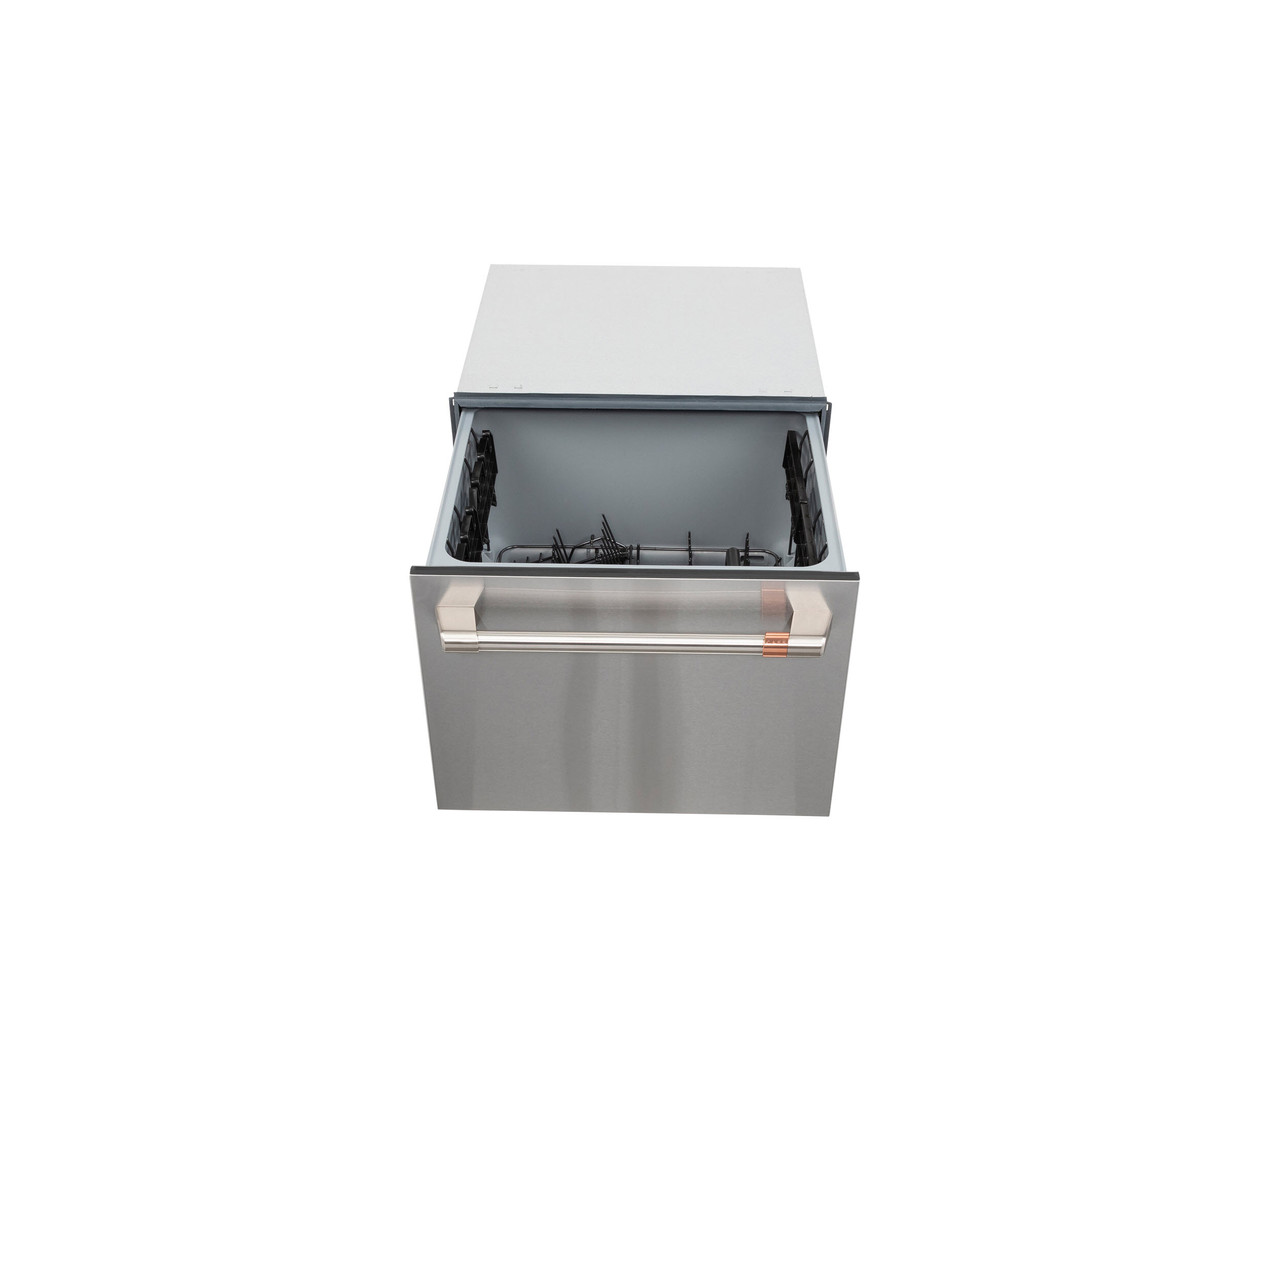 Types of Single Drawer Dishwasher For Sale, Drawer Style